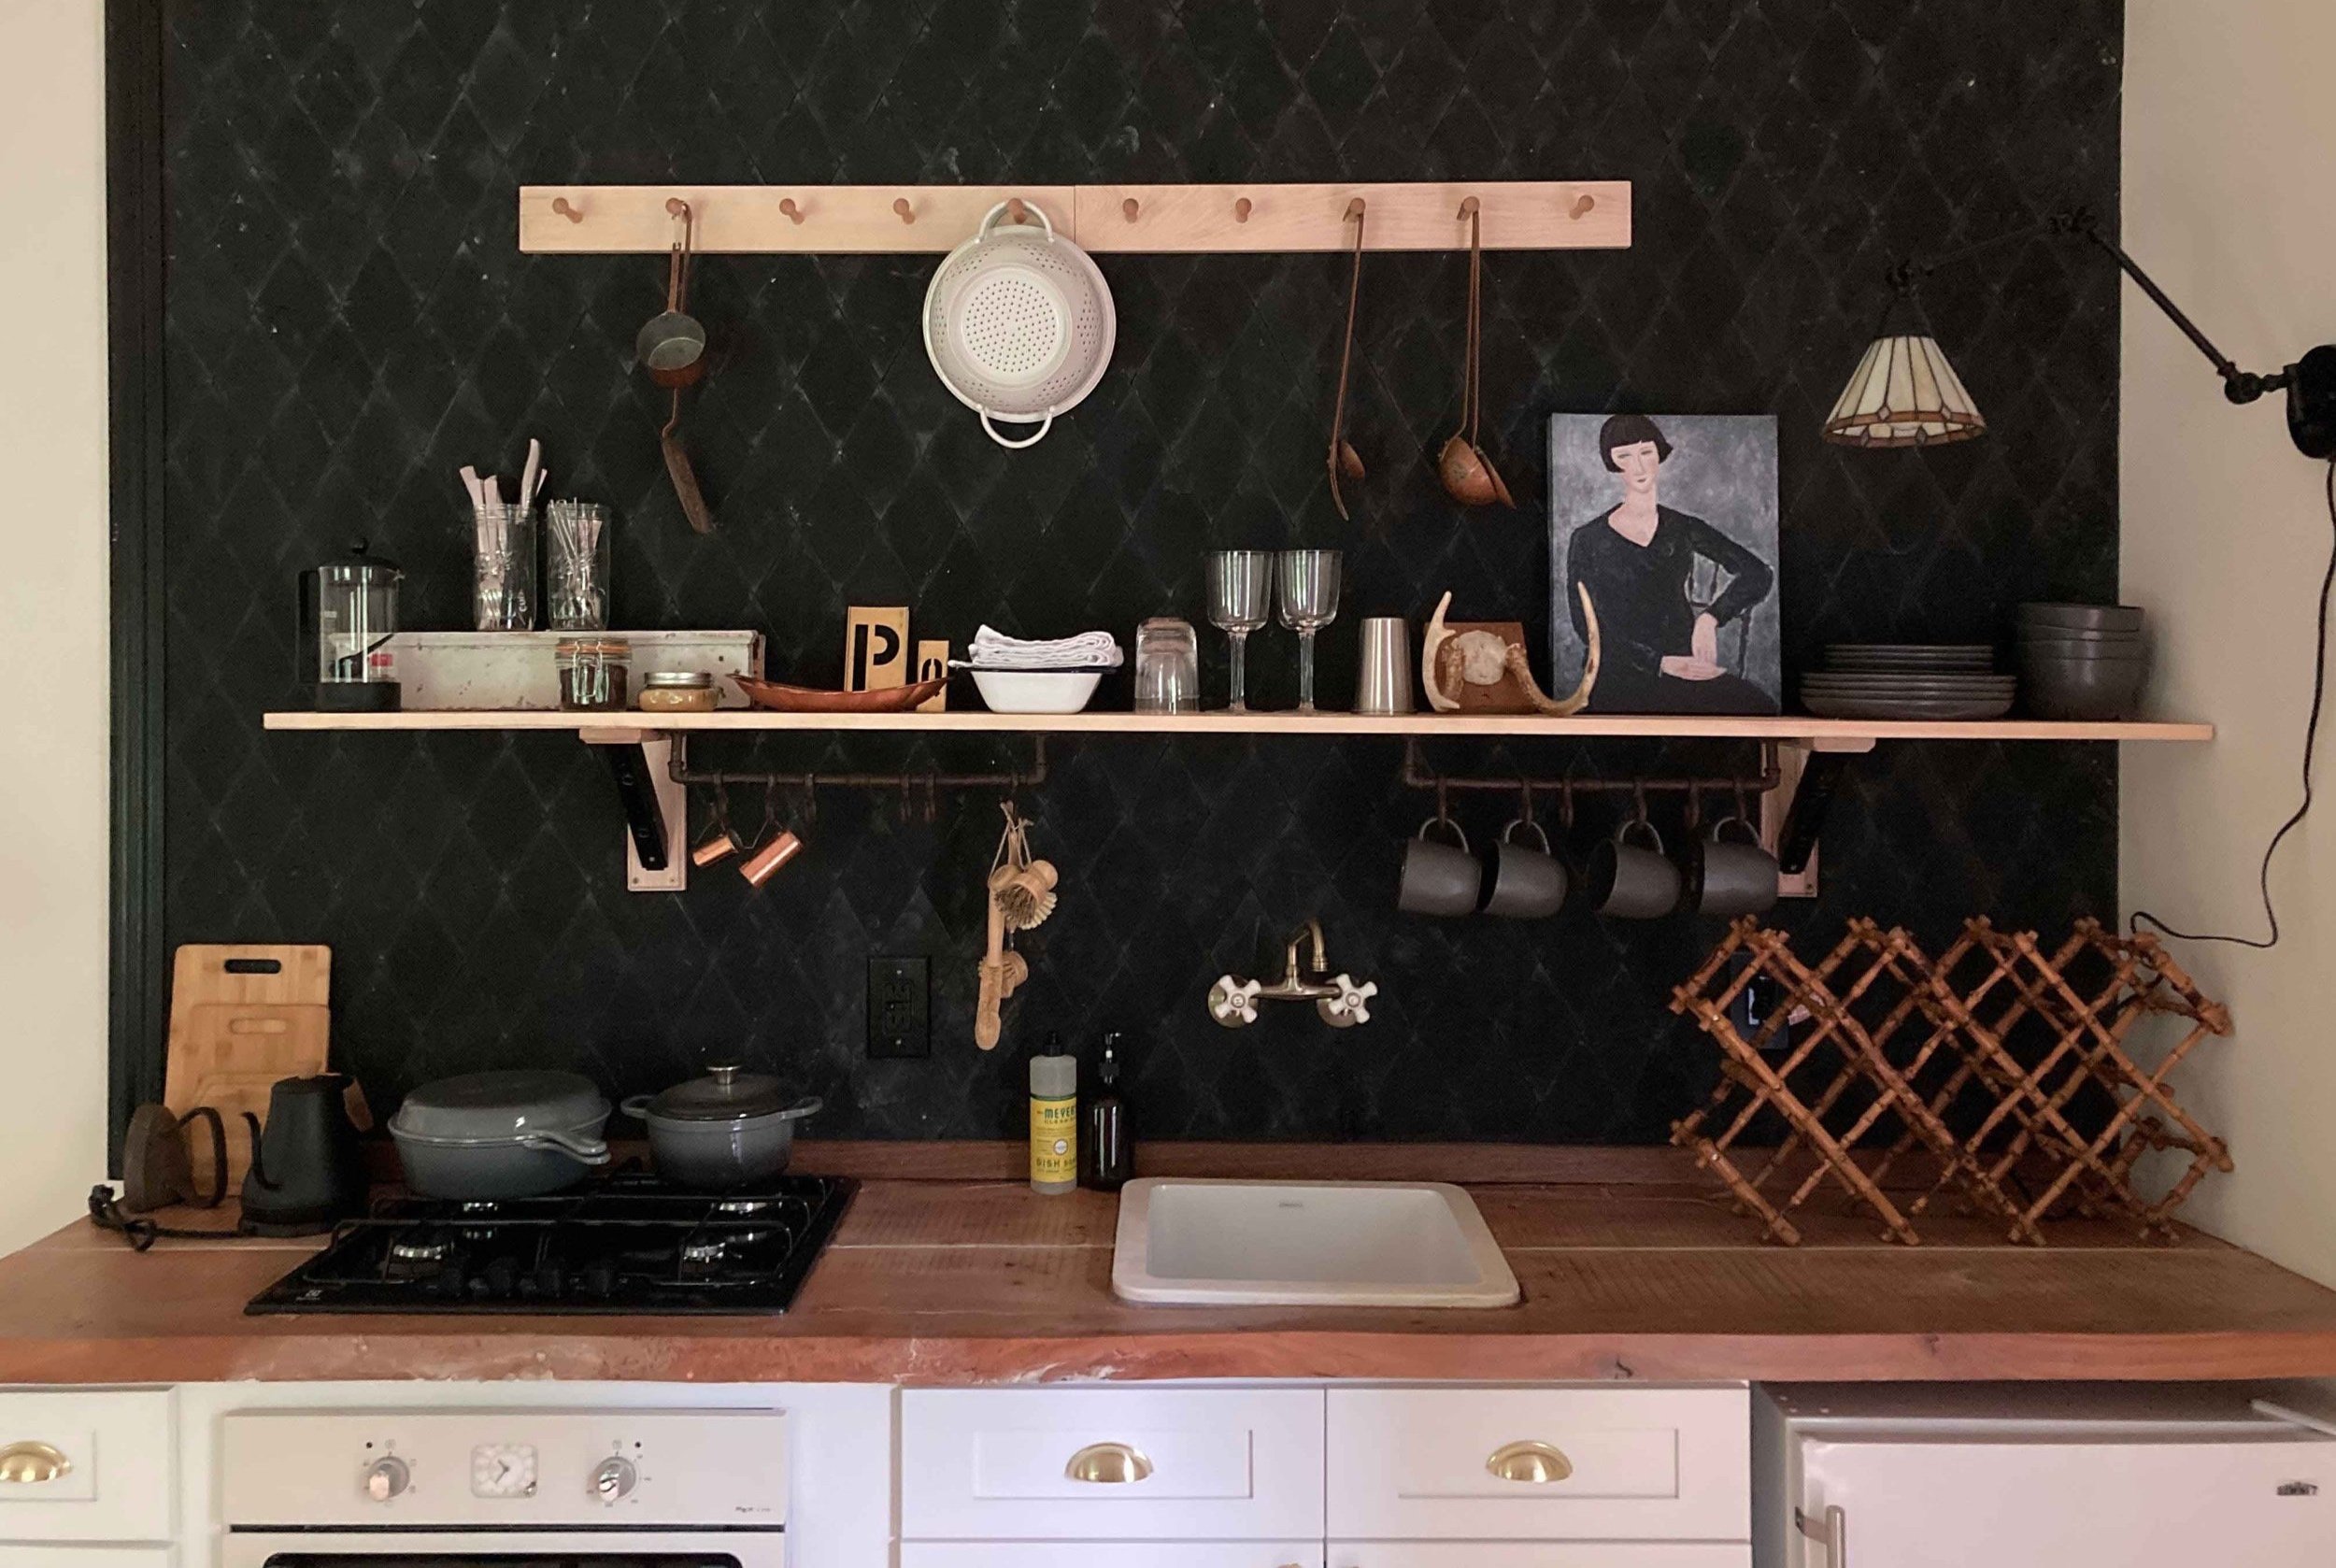 kitchen-at-the-studio-features-black-tile-and-cooking-tools.jpg